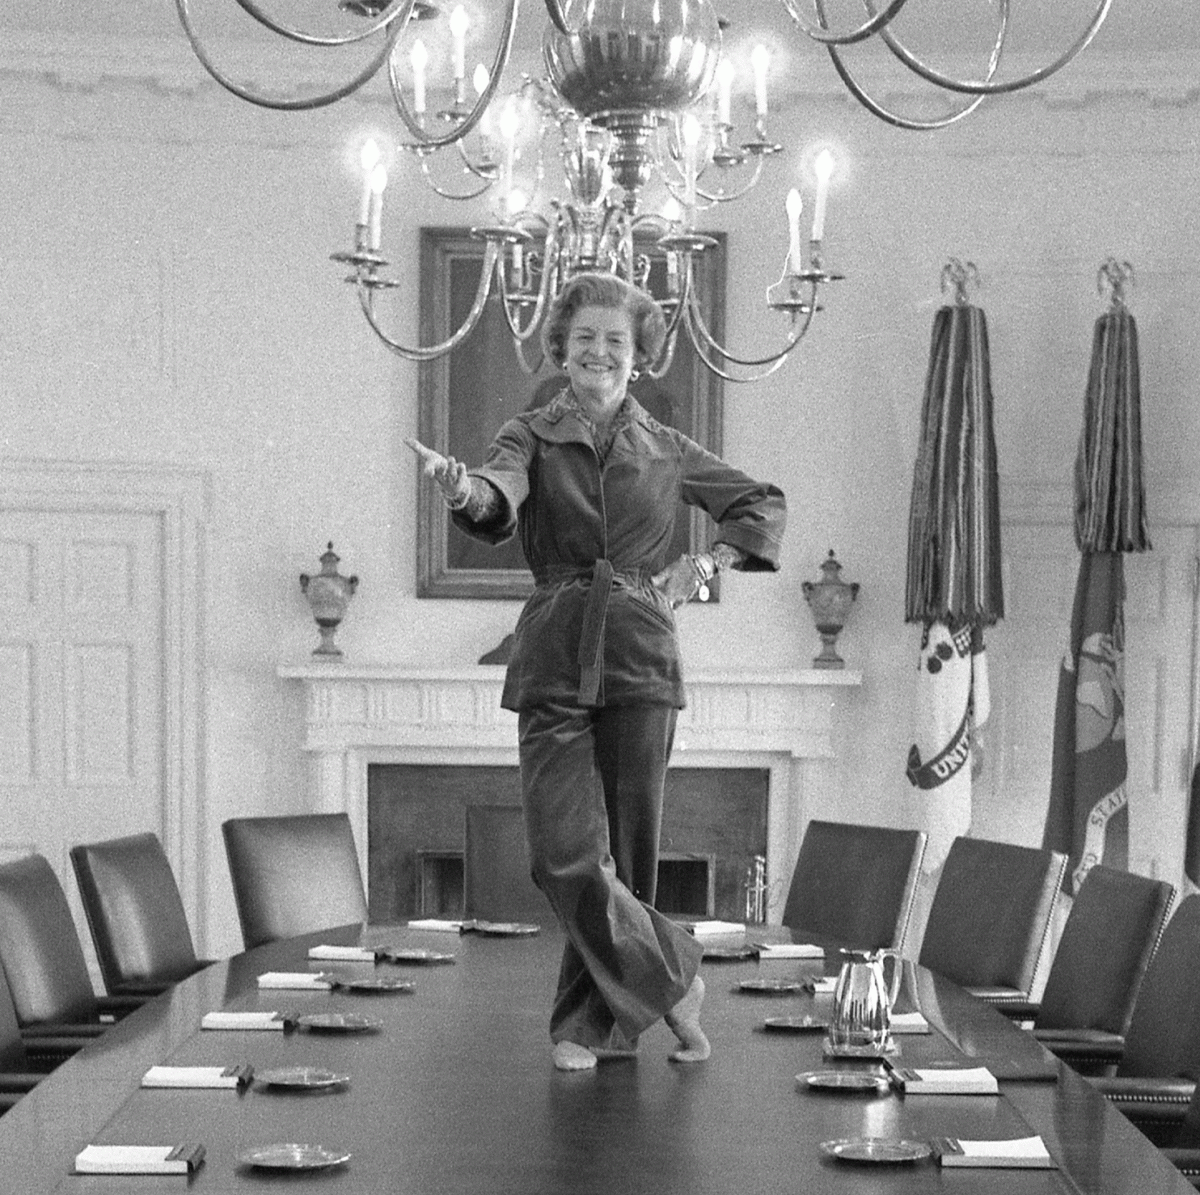 First Lady Betty Ford dances on the Cabinet Room table on the day before departing the White House upon the inauguration of President Jimmy Carter, January 19, 1977.